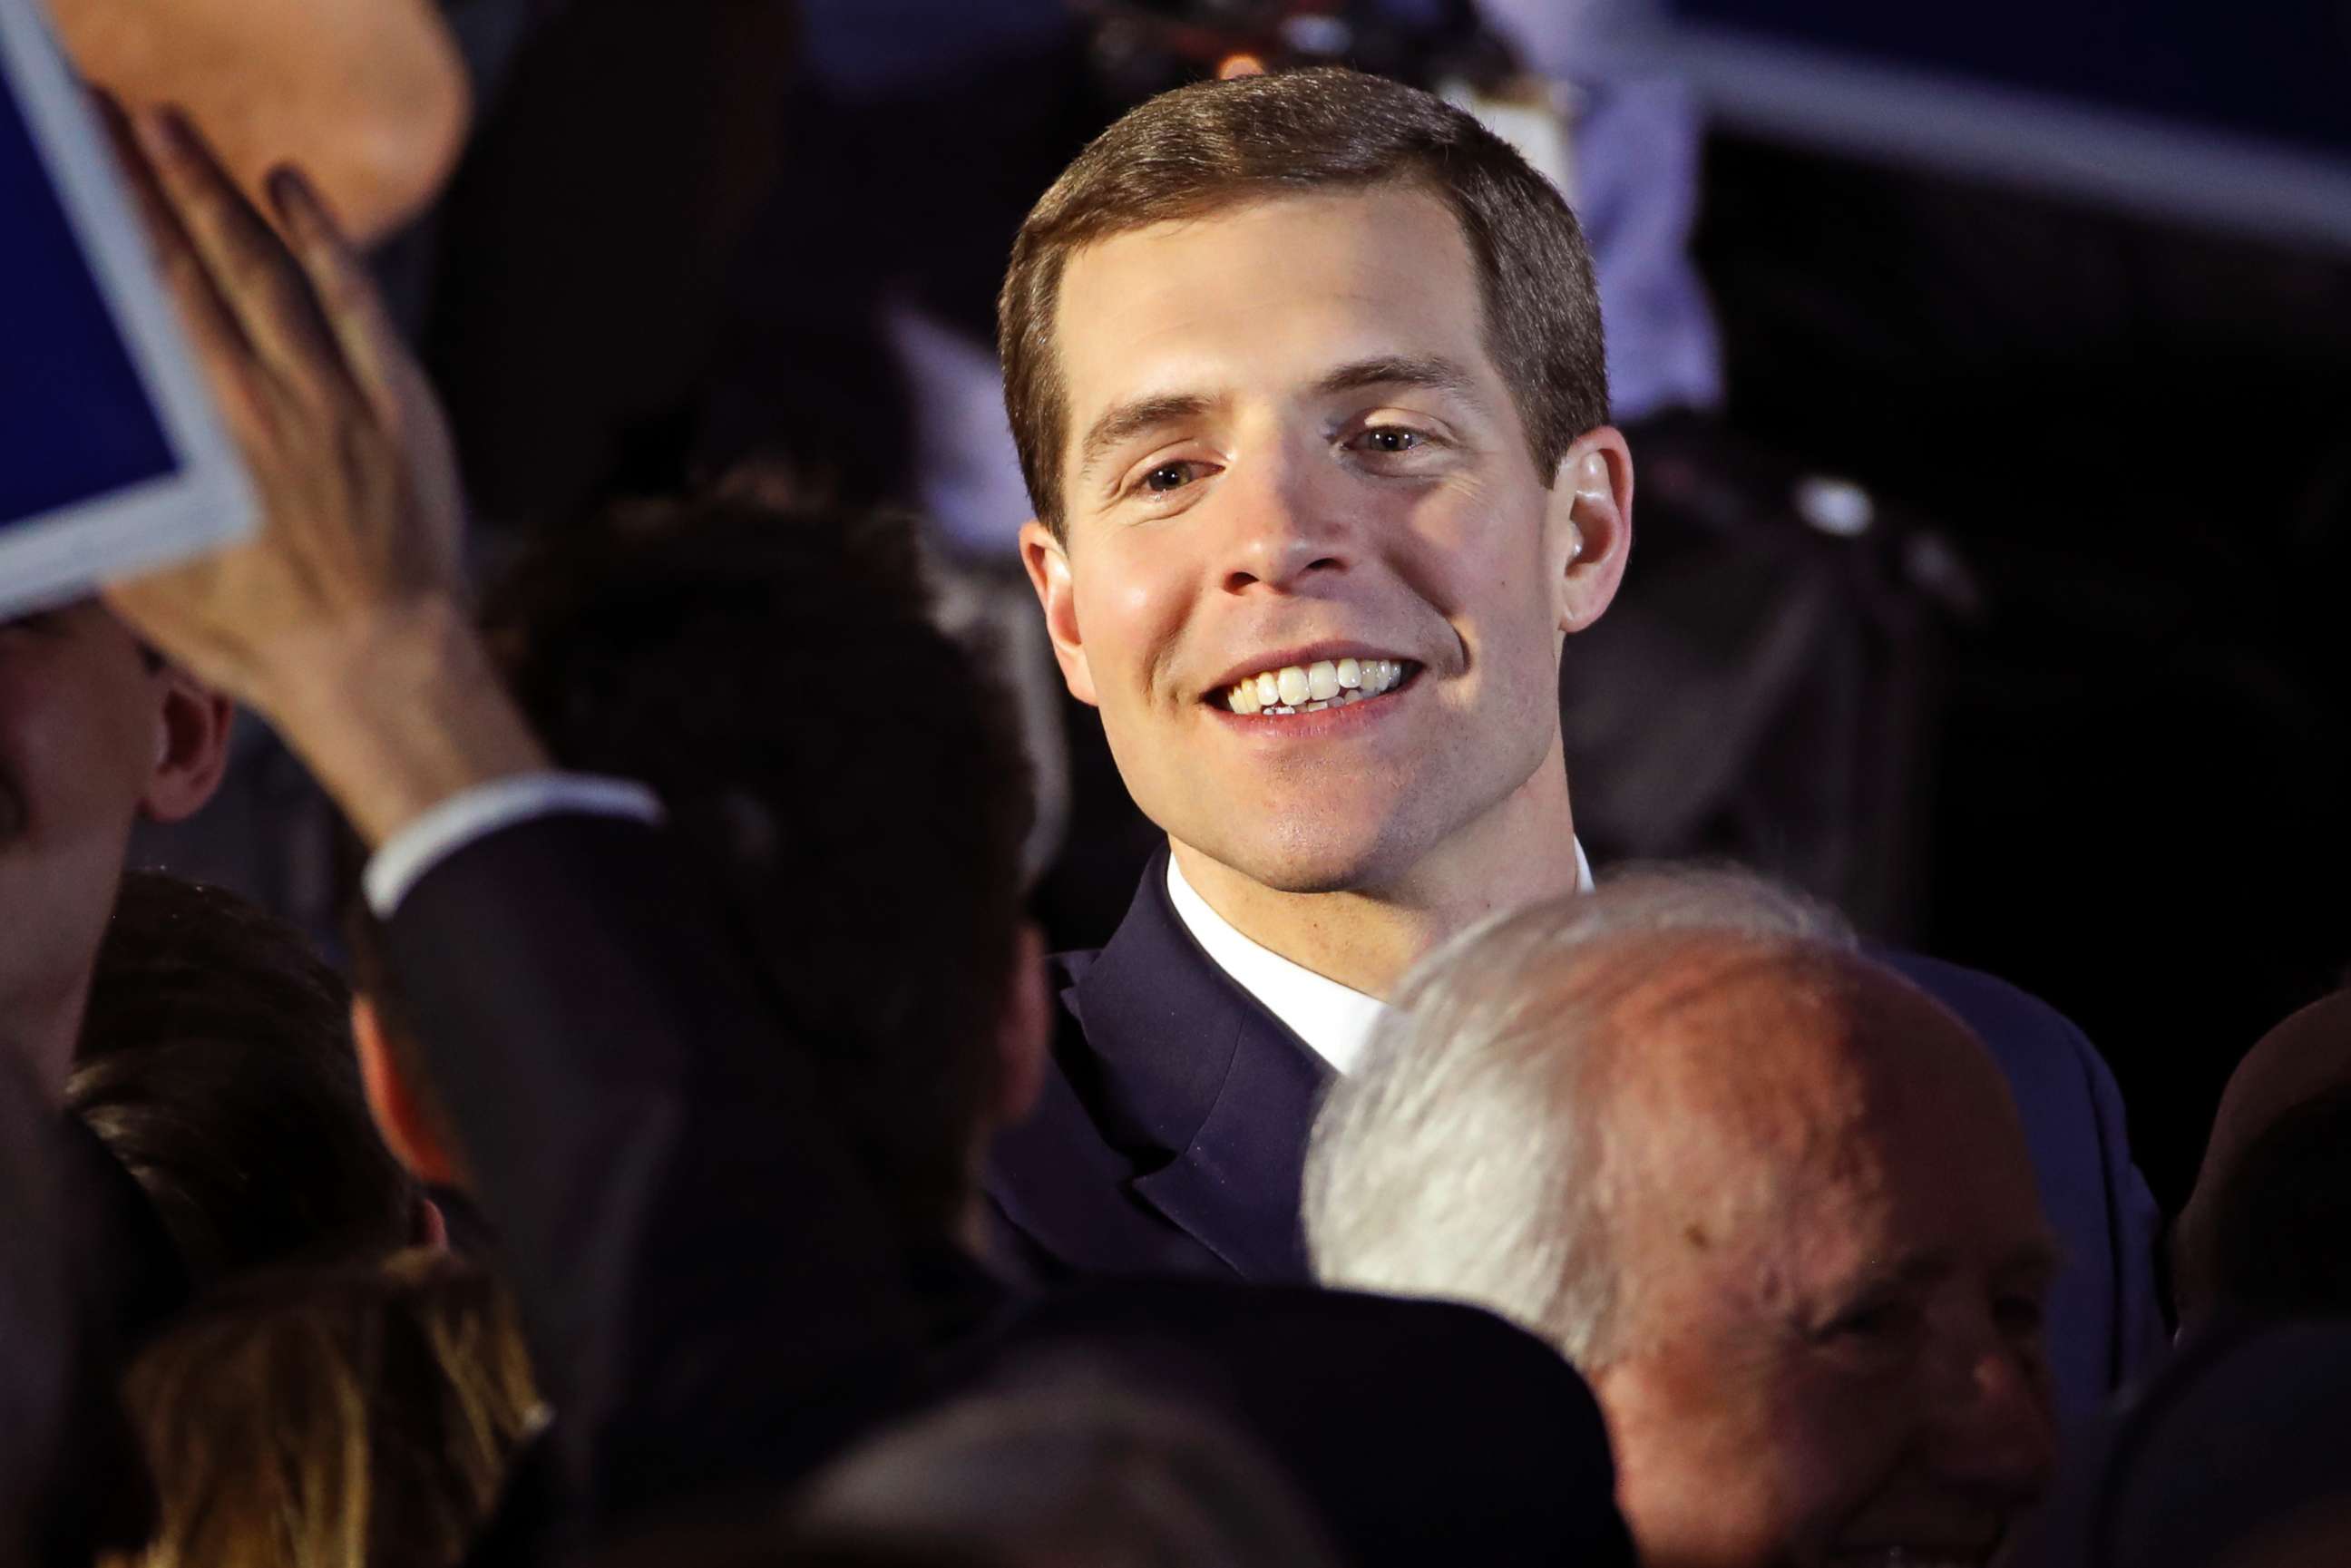 PHOTO: Conor Lamb celebrates with his supporters at his election night party in Canonsburg, Pa., early Wednesday, March 14, 2018.